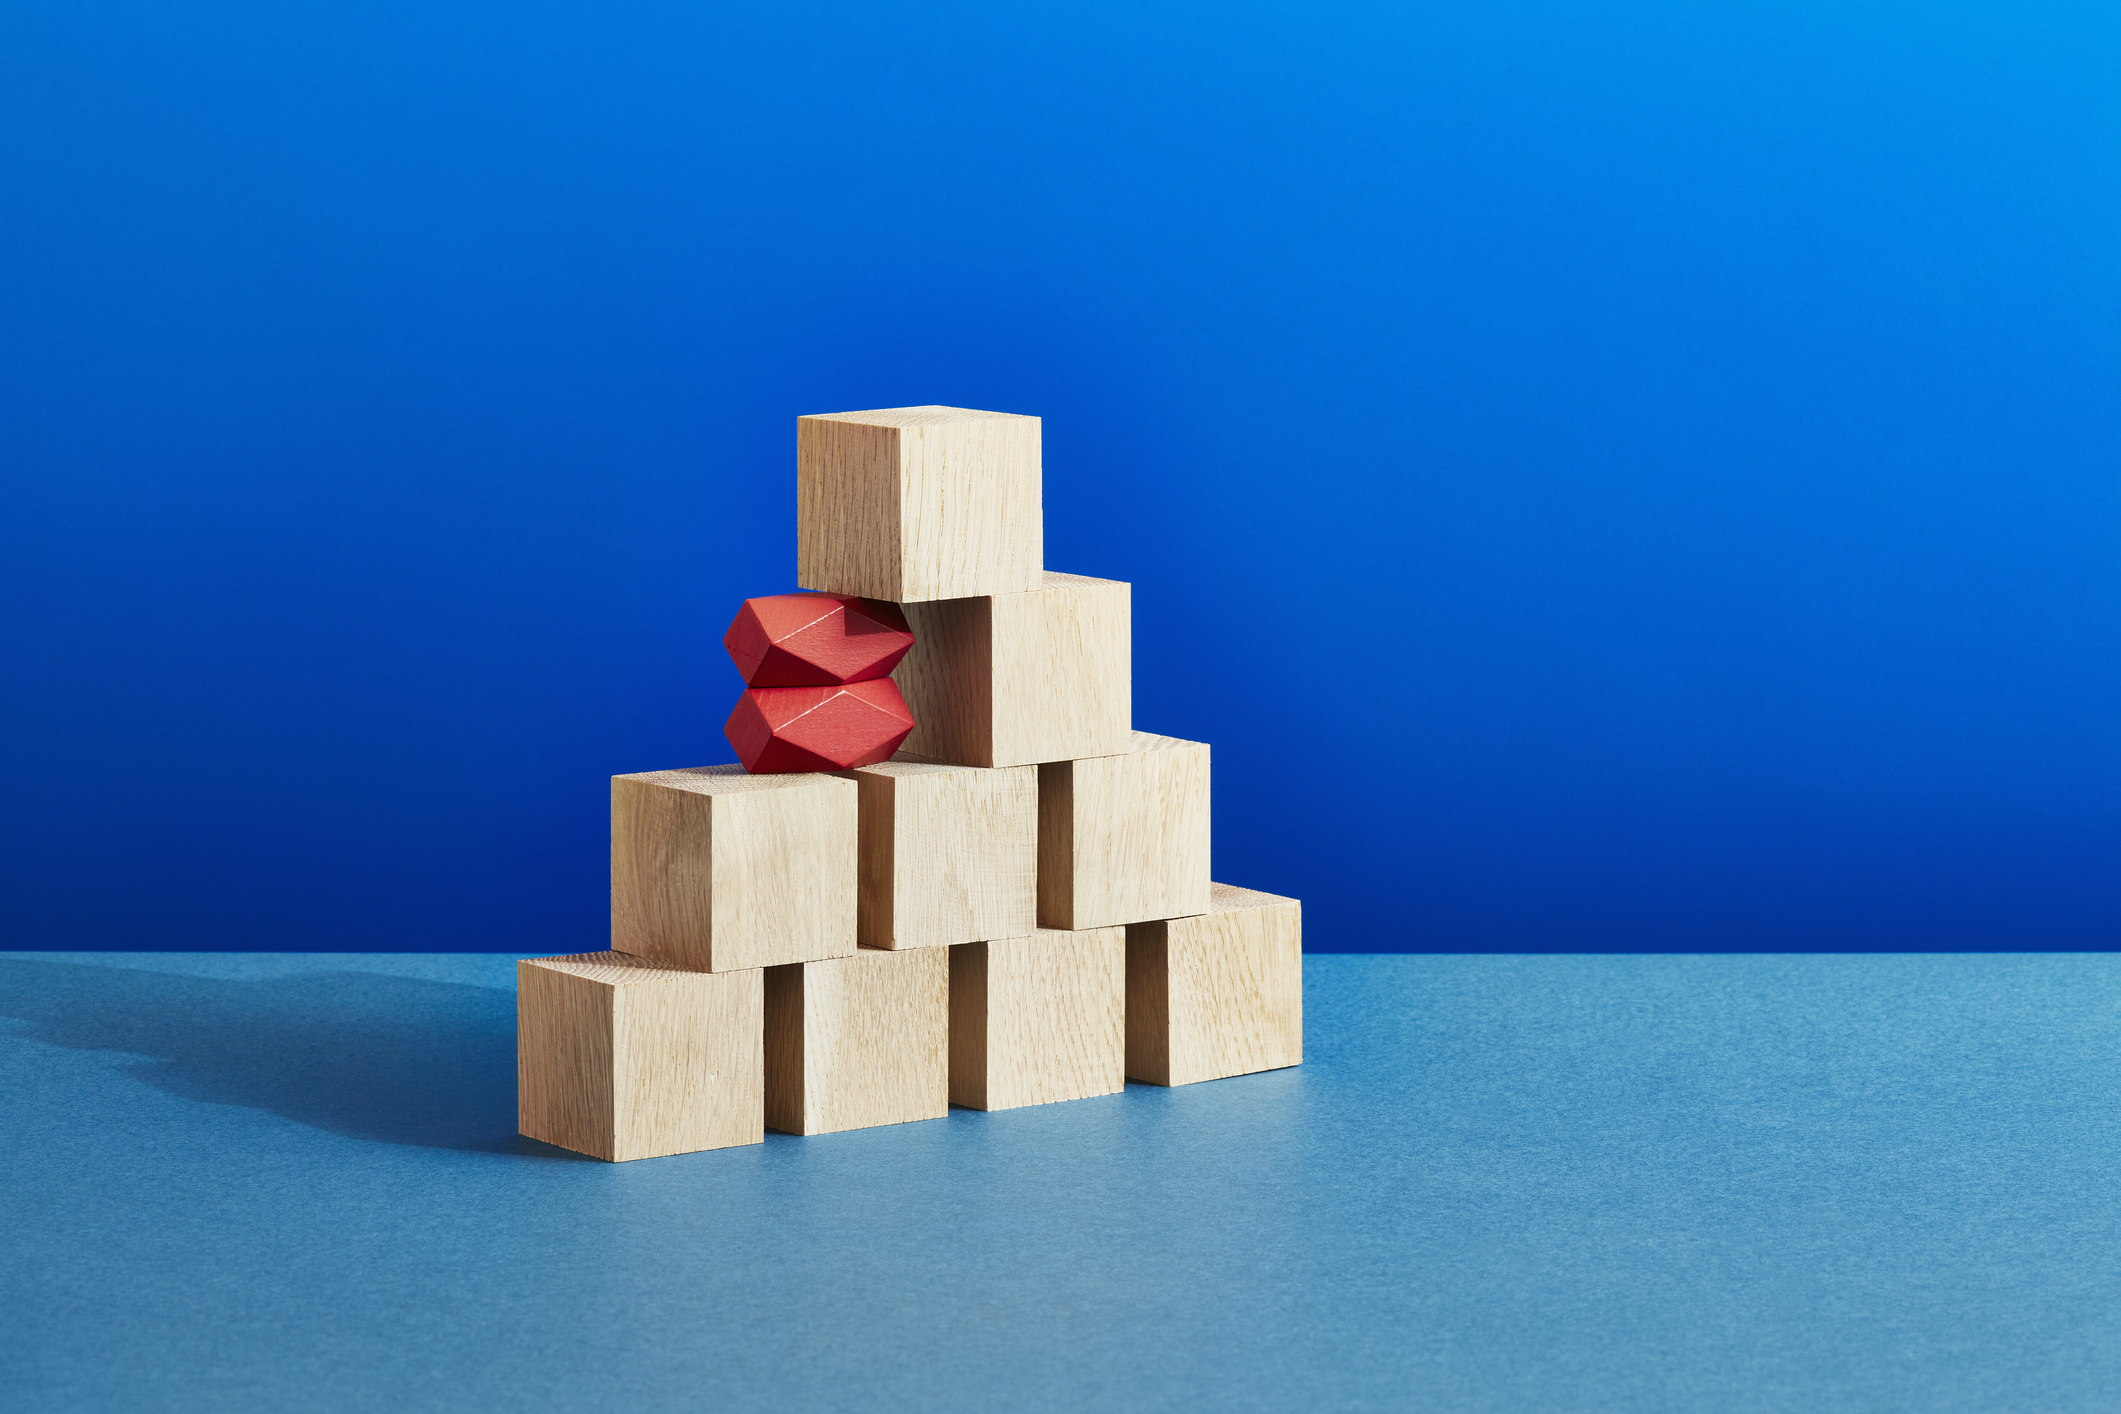 A stack of plain wooden blocks with two unusual red blocks supporting the edge